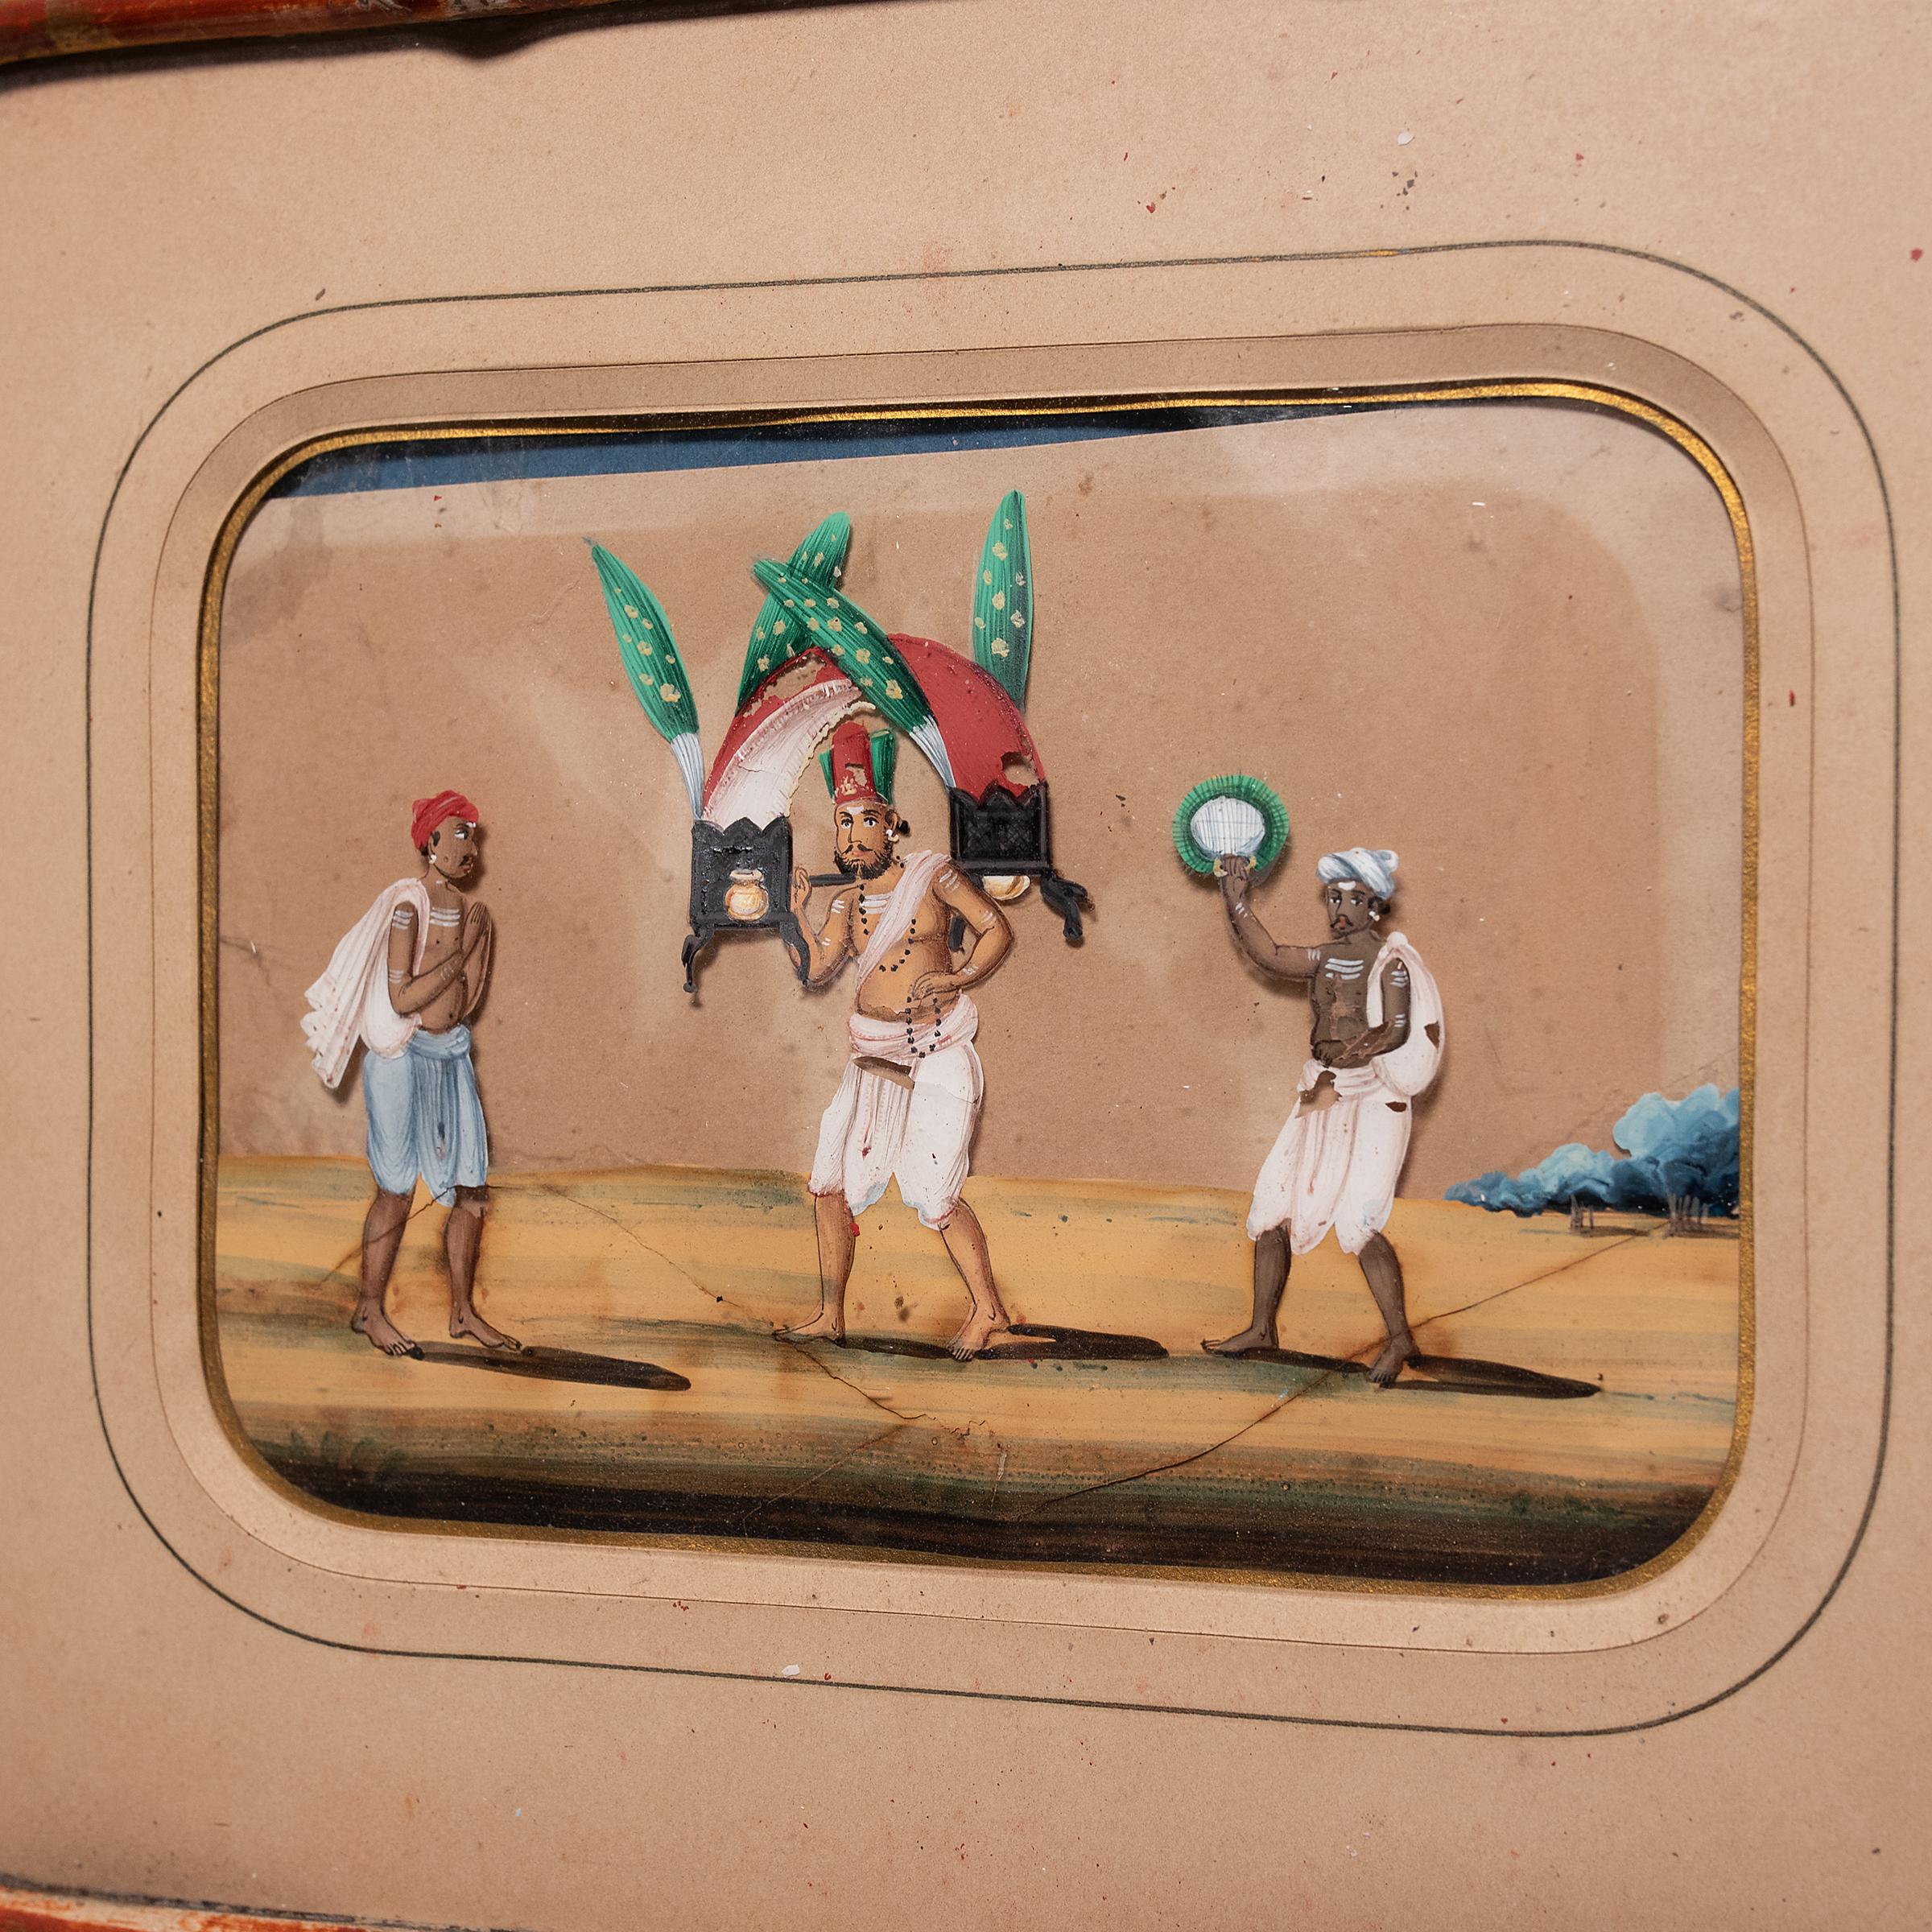 Made with gouache paint and encased in a charming bamboo frame, is this miniature Indian mica painting depicting village life in the 19th-century. Considered a novelty for the colonial tourist market, miniature mica paintings were commissioned by